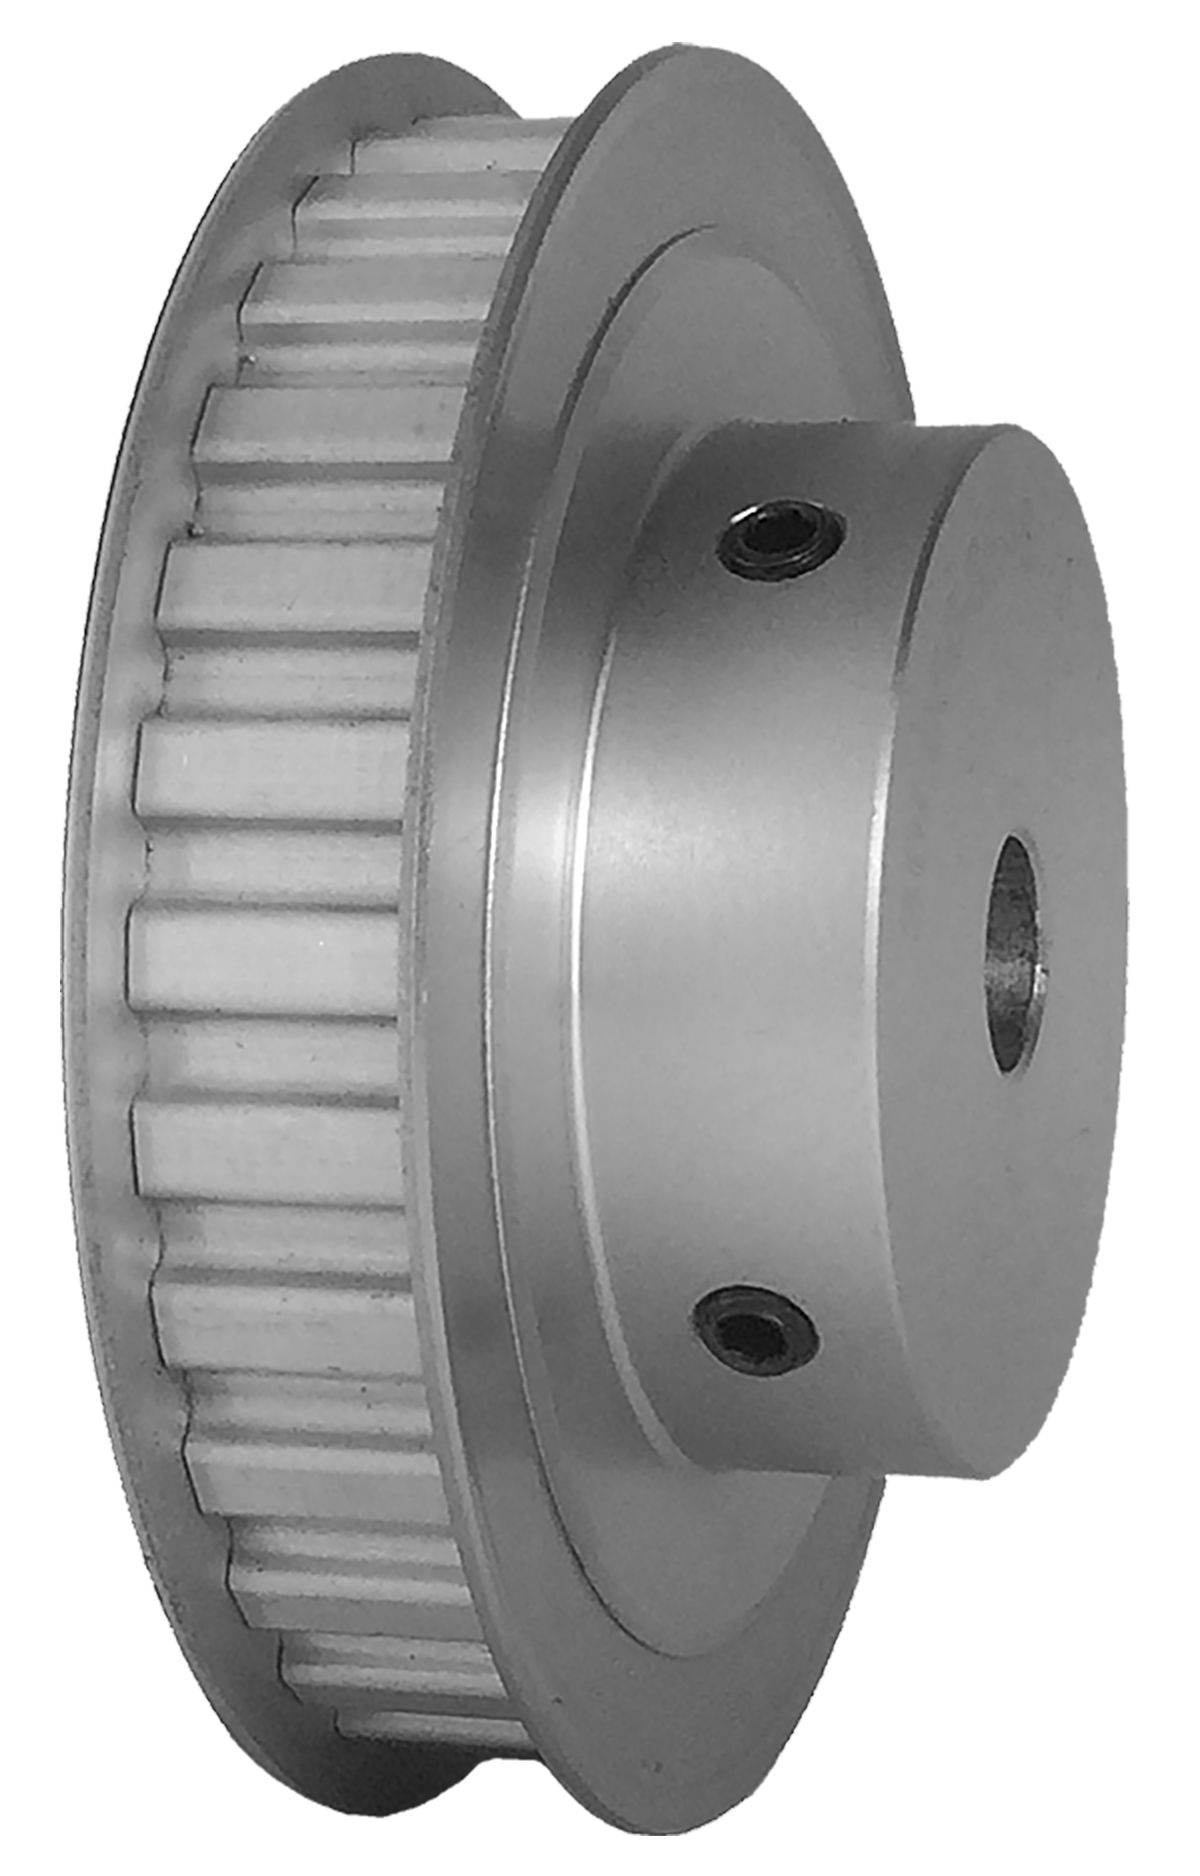 30L050-6FA6 - Aluminum Imperial Pitch Pulleys